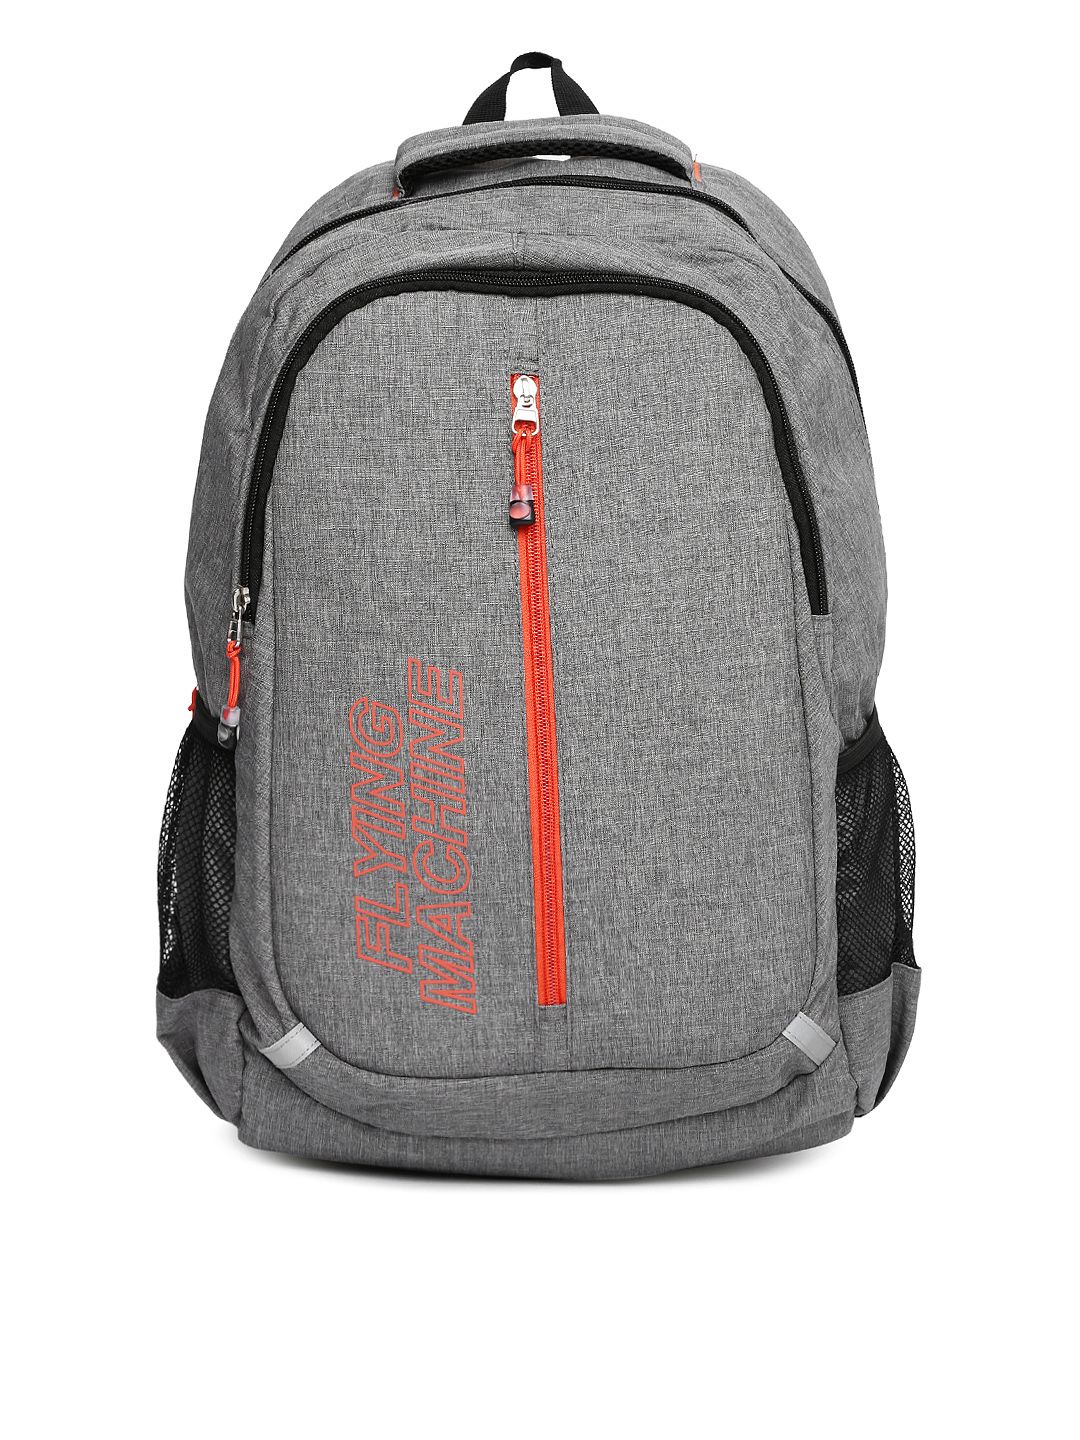 Flying Machine Unisex Grey Laptop Backpack Price in India